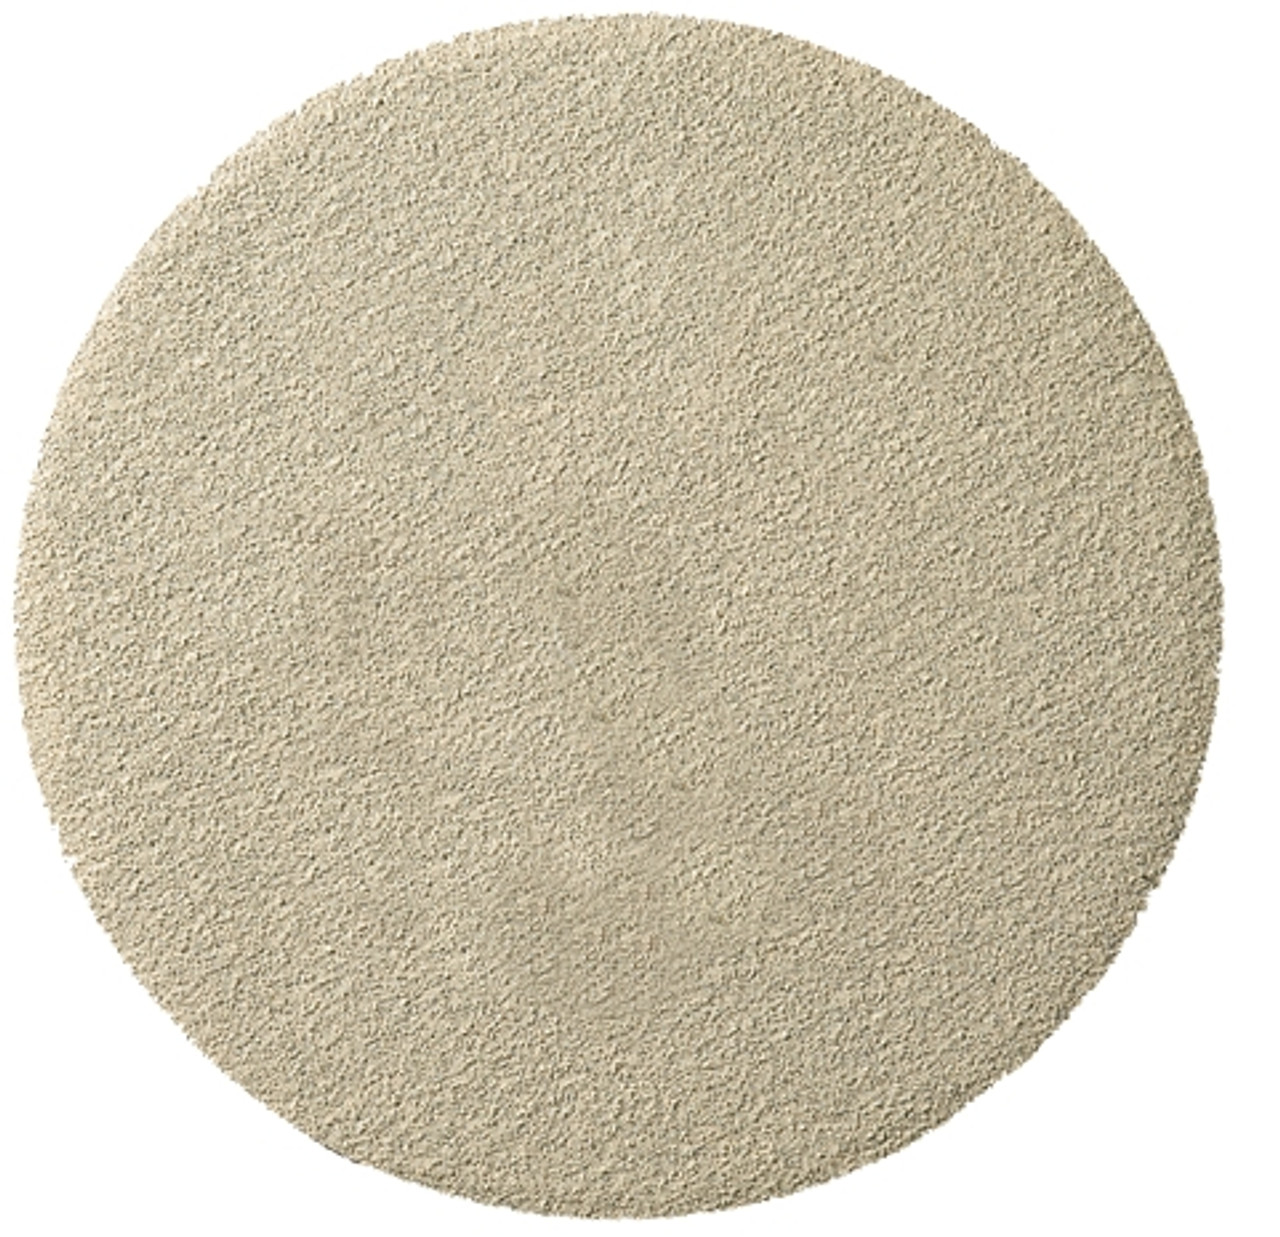 Self Fastening Disc - (Ps33) Paper/Aluminium Oxide/No Hole 80Grit 125Mm